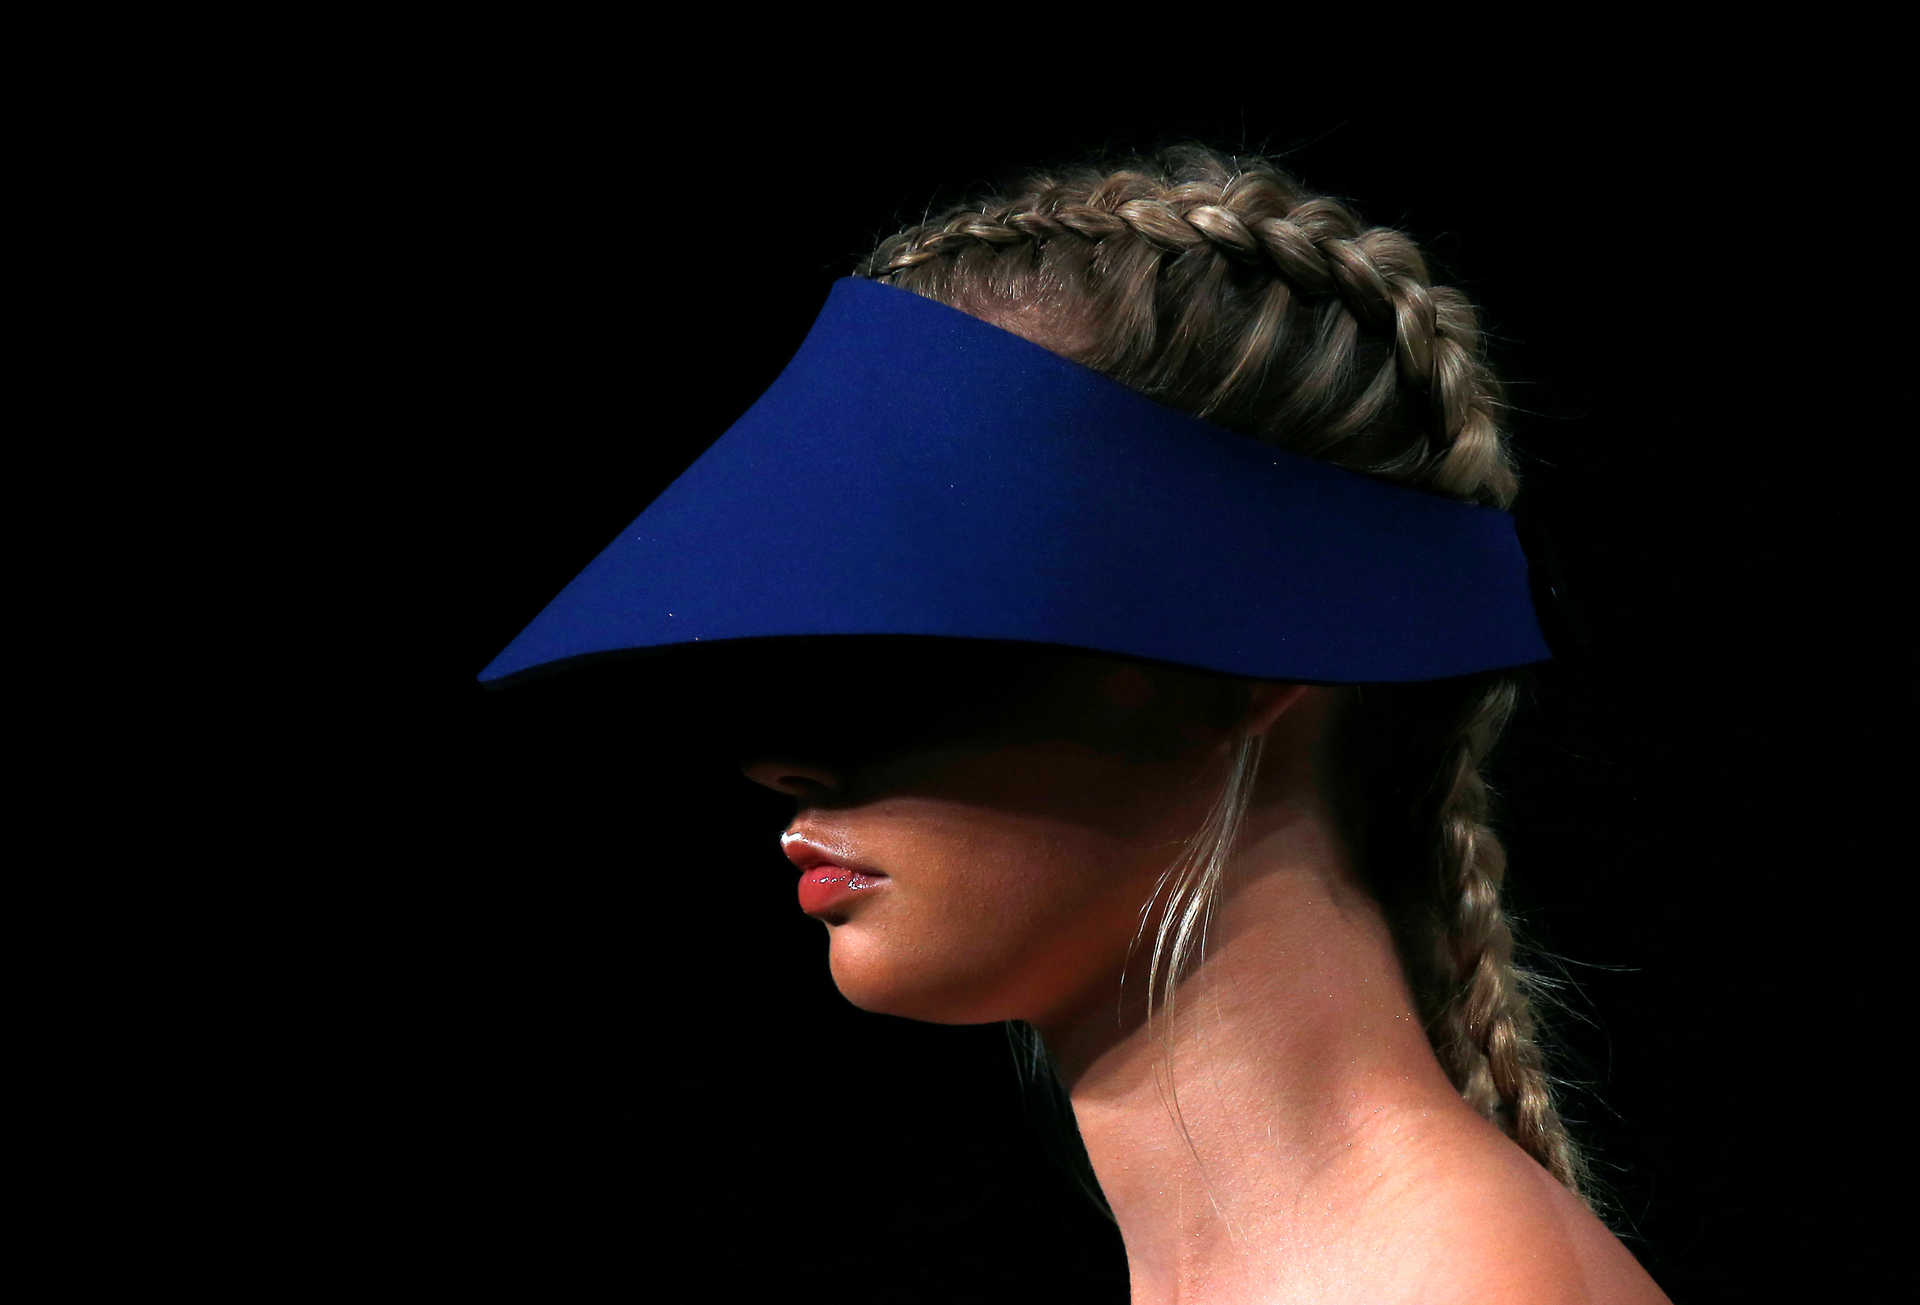 A model wears a hat as she presents a creation from the fashion label Bondi Bather during Australian Fashion week in Sydney